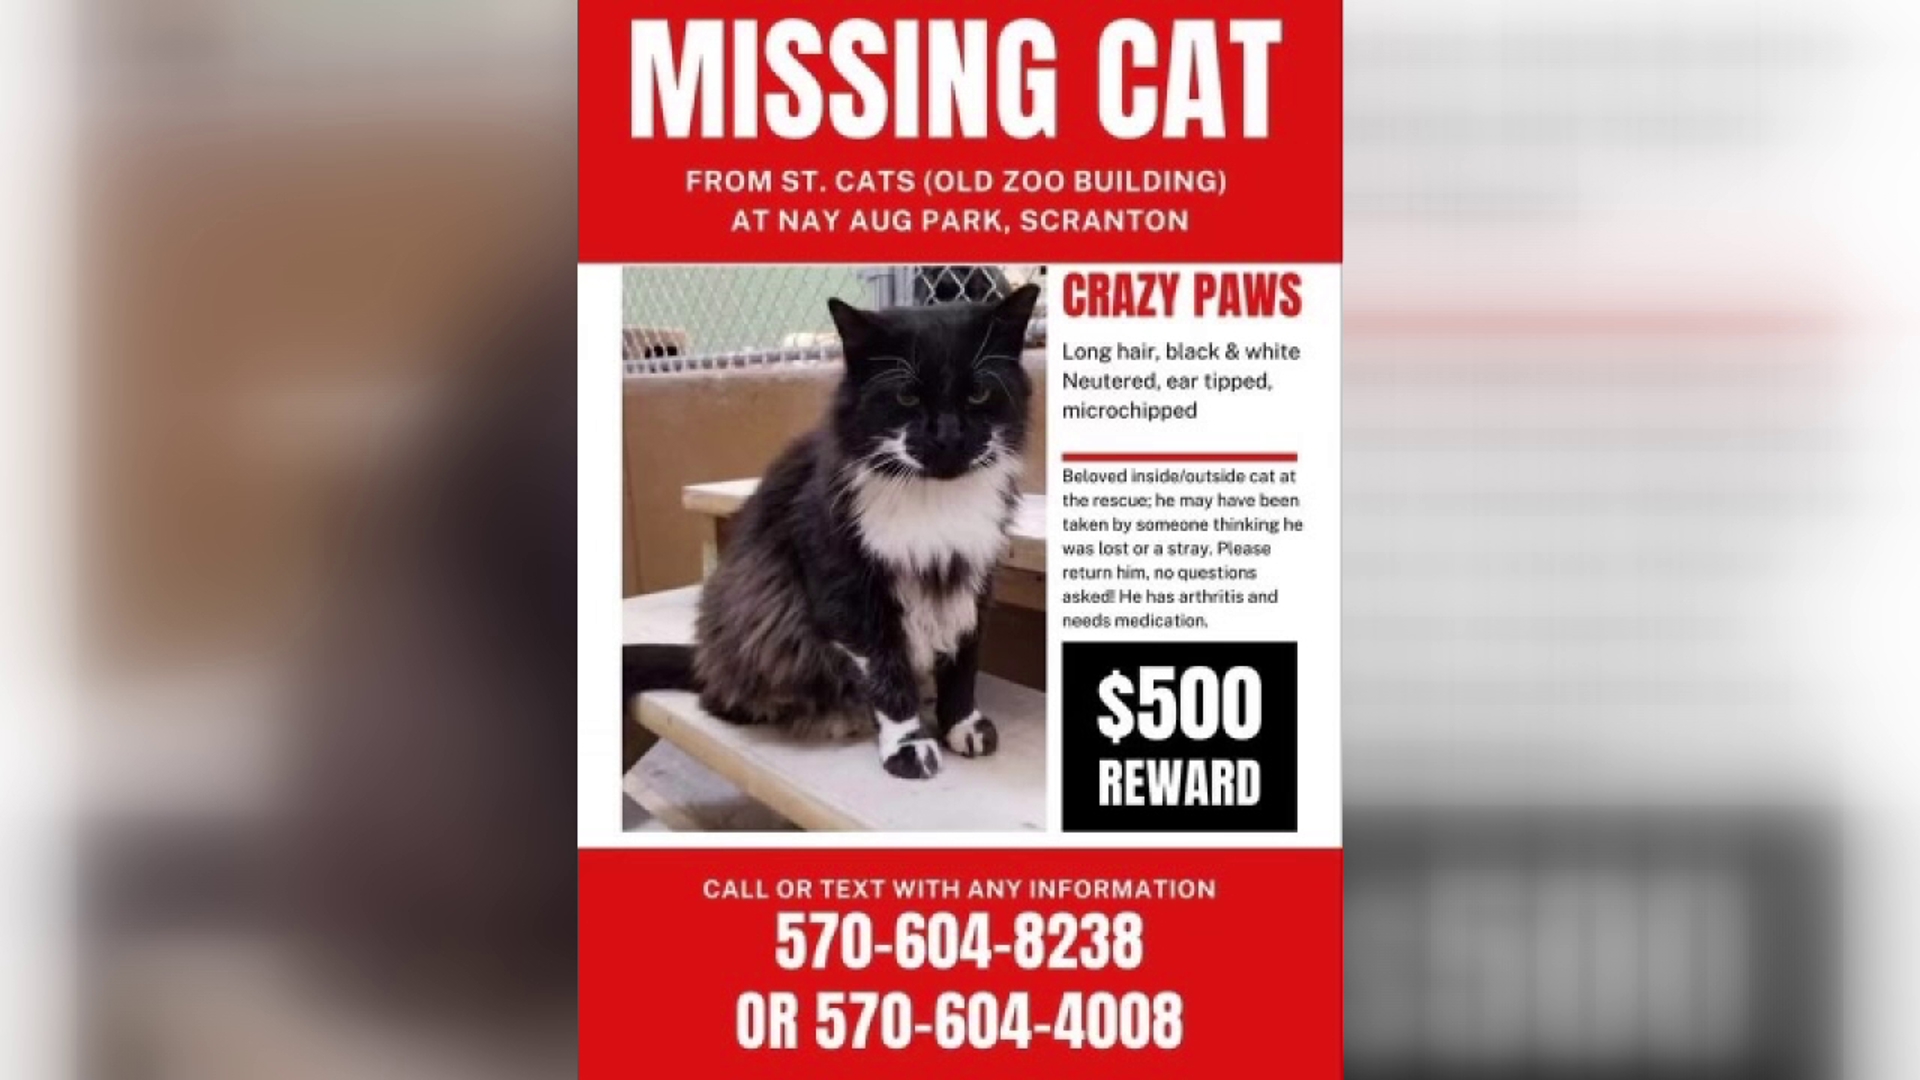 Crazy Paws is missing from Street Cats at Nay Aug Park